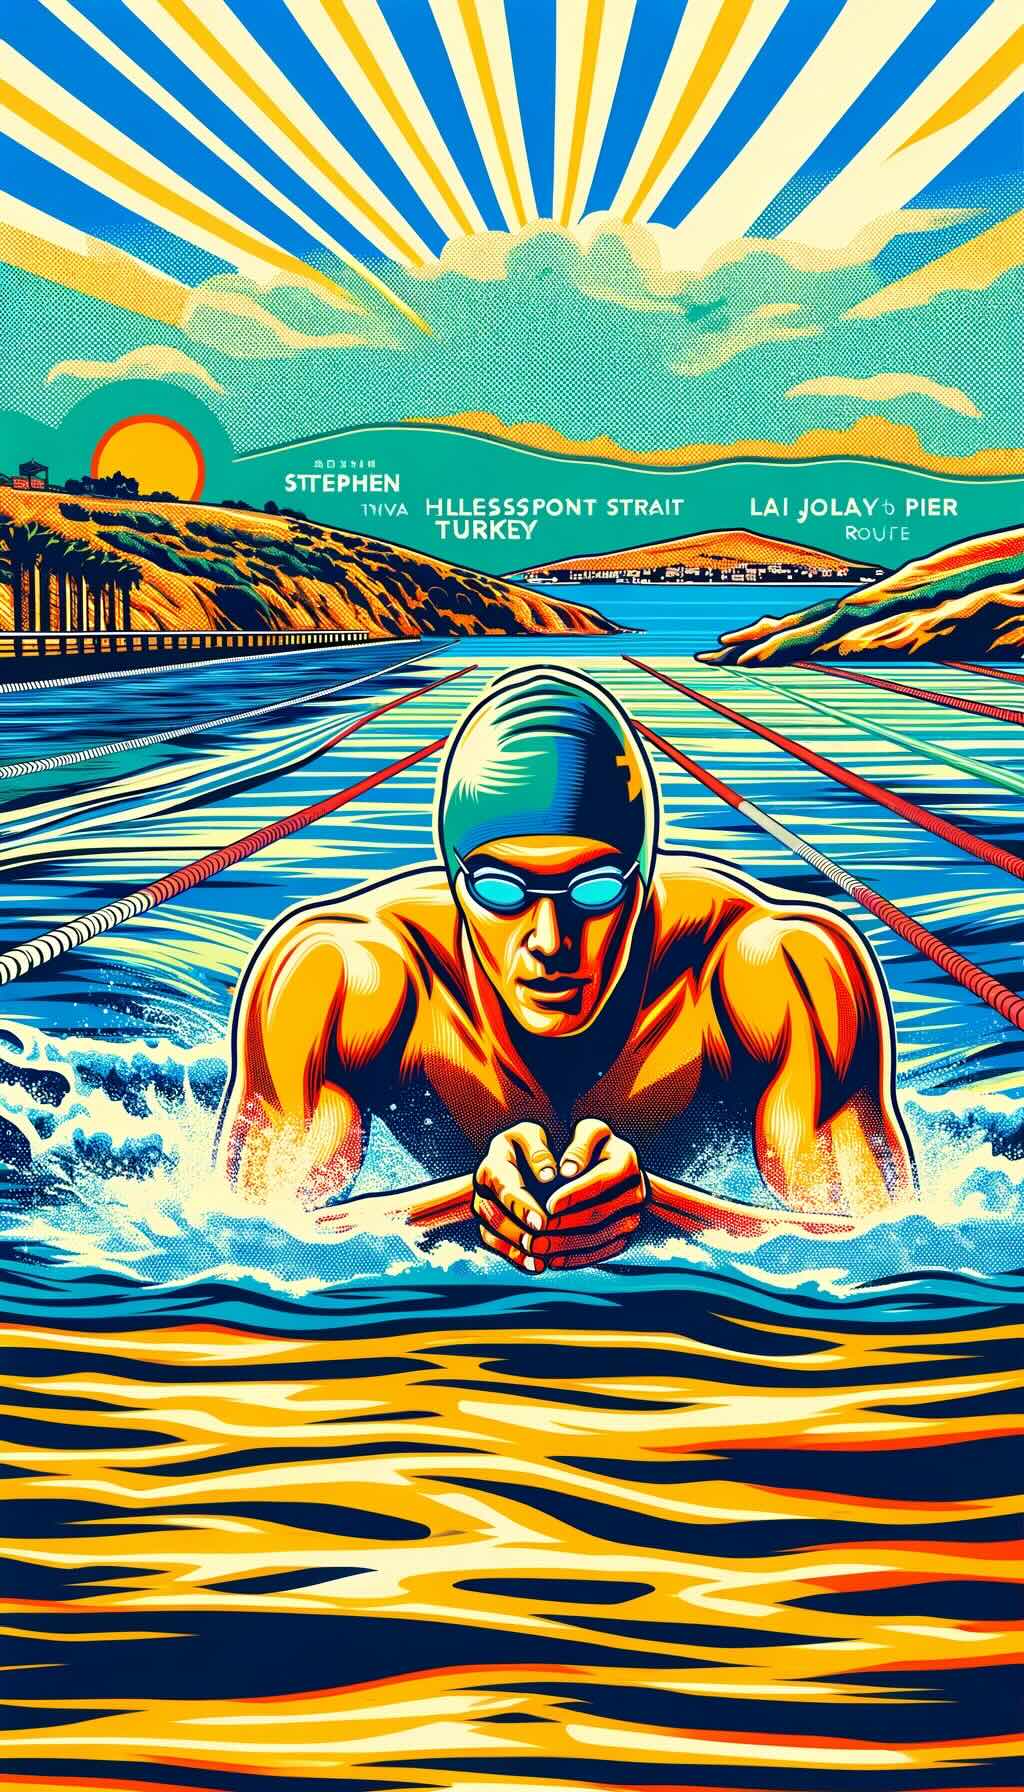 Stephen, the open water swimmer. It depicts his swimming journey, with elements from both the Hellespont Strait in Turkey and the La Jolla Cove to Pier route. The image embodies the vibrant and colorful essence of Pop Art, emphasizing Stephen's determination and focus